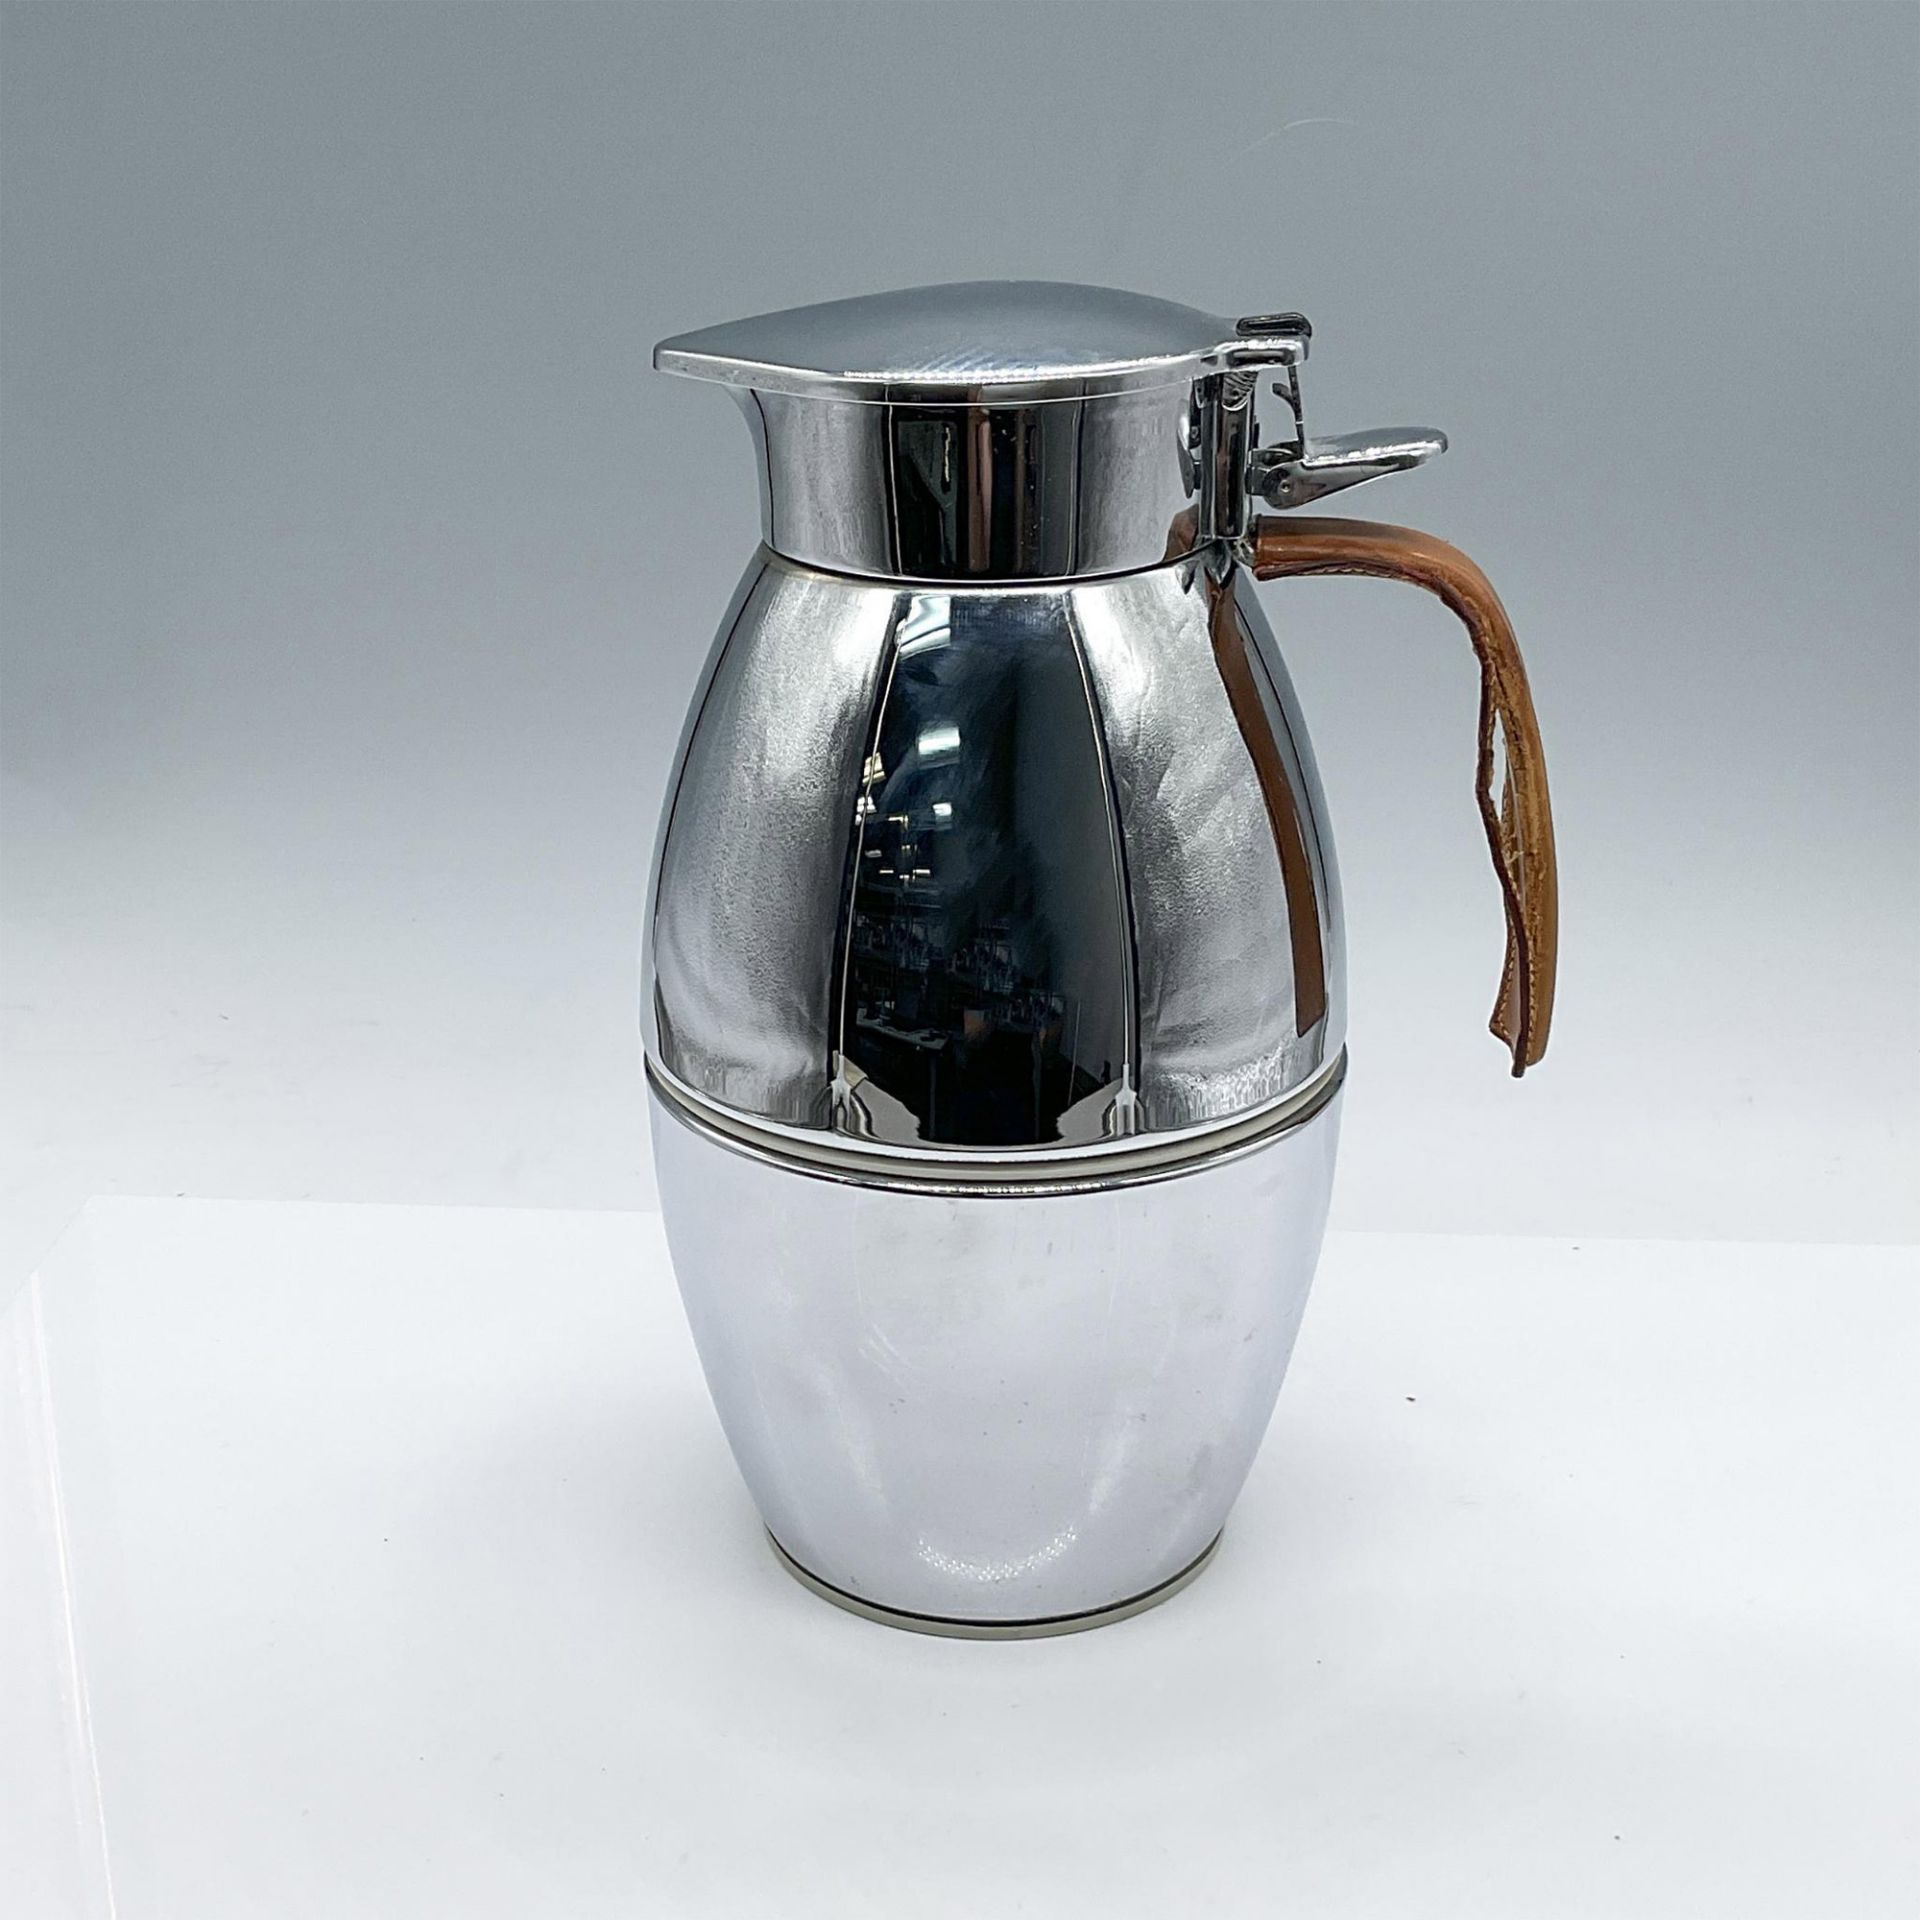 Hermes Chrome Insulated Carafe - Image 4 of 6